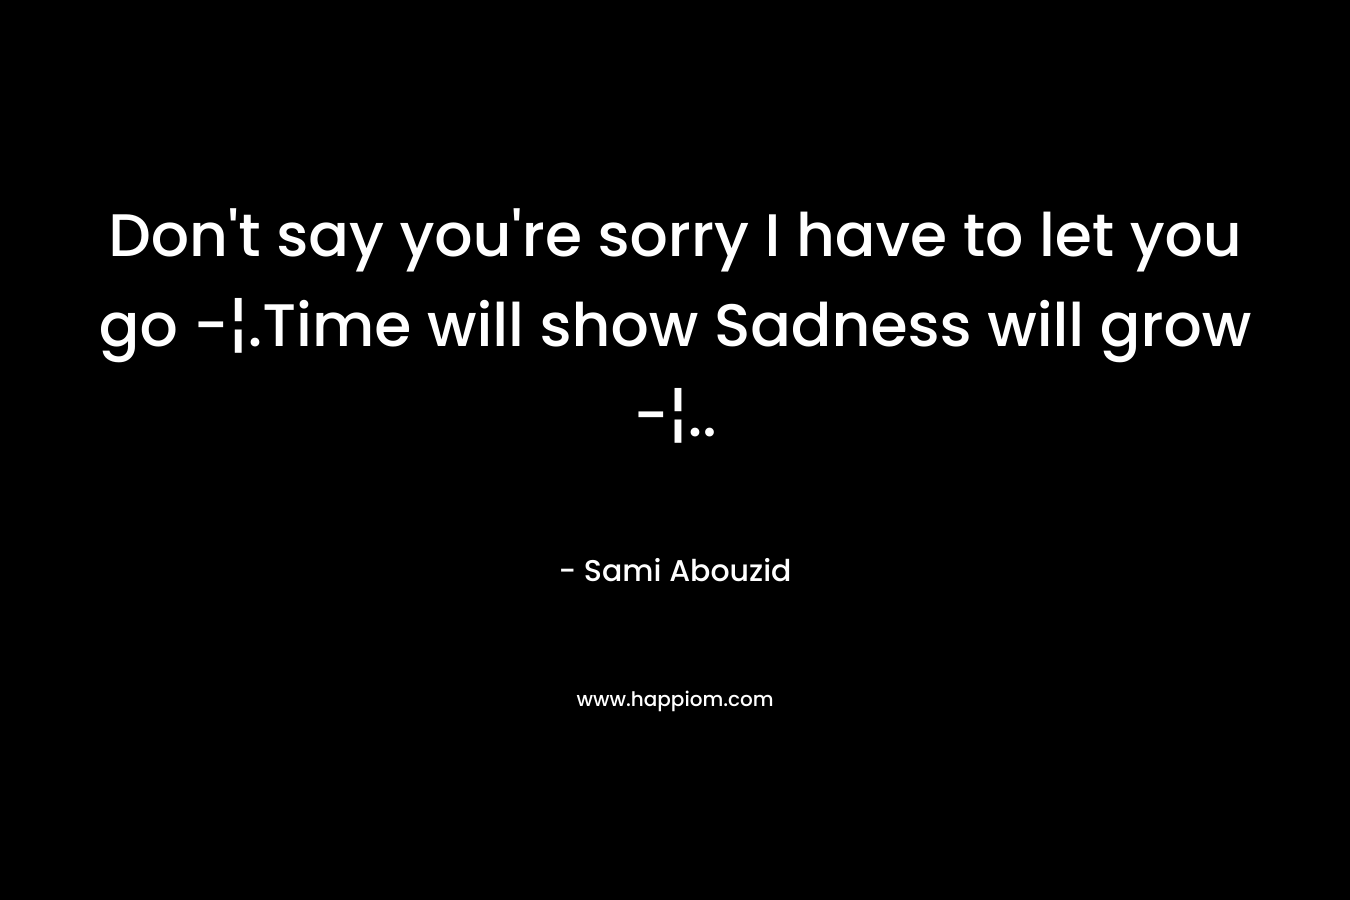 Don't say you're sorry I have to let you go -¦.Time will show Sadness will grow -¦..